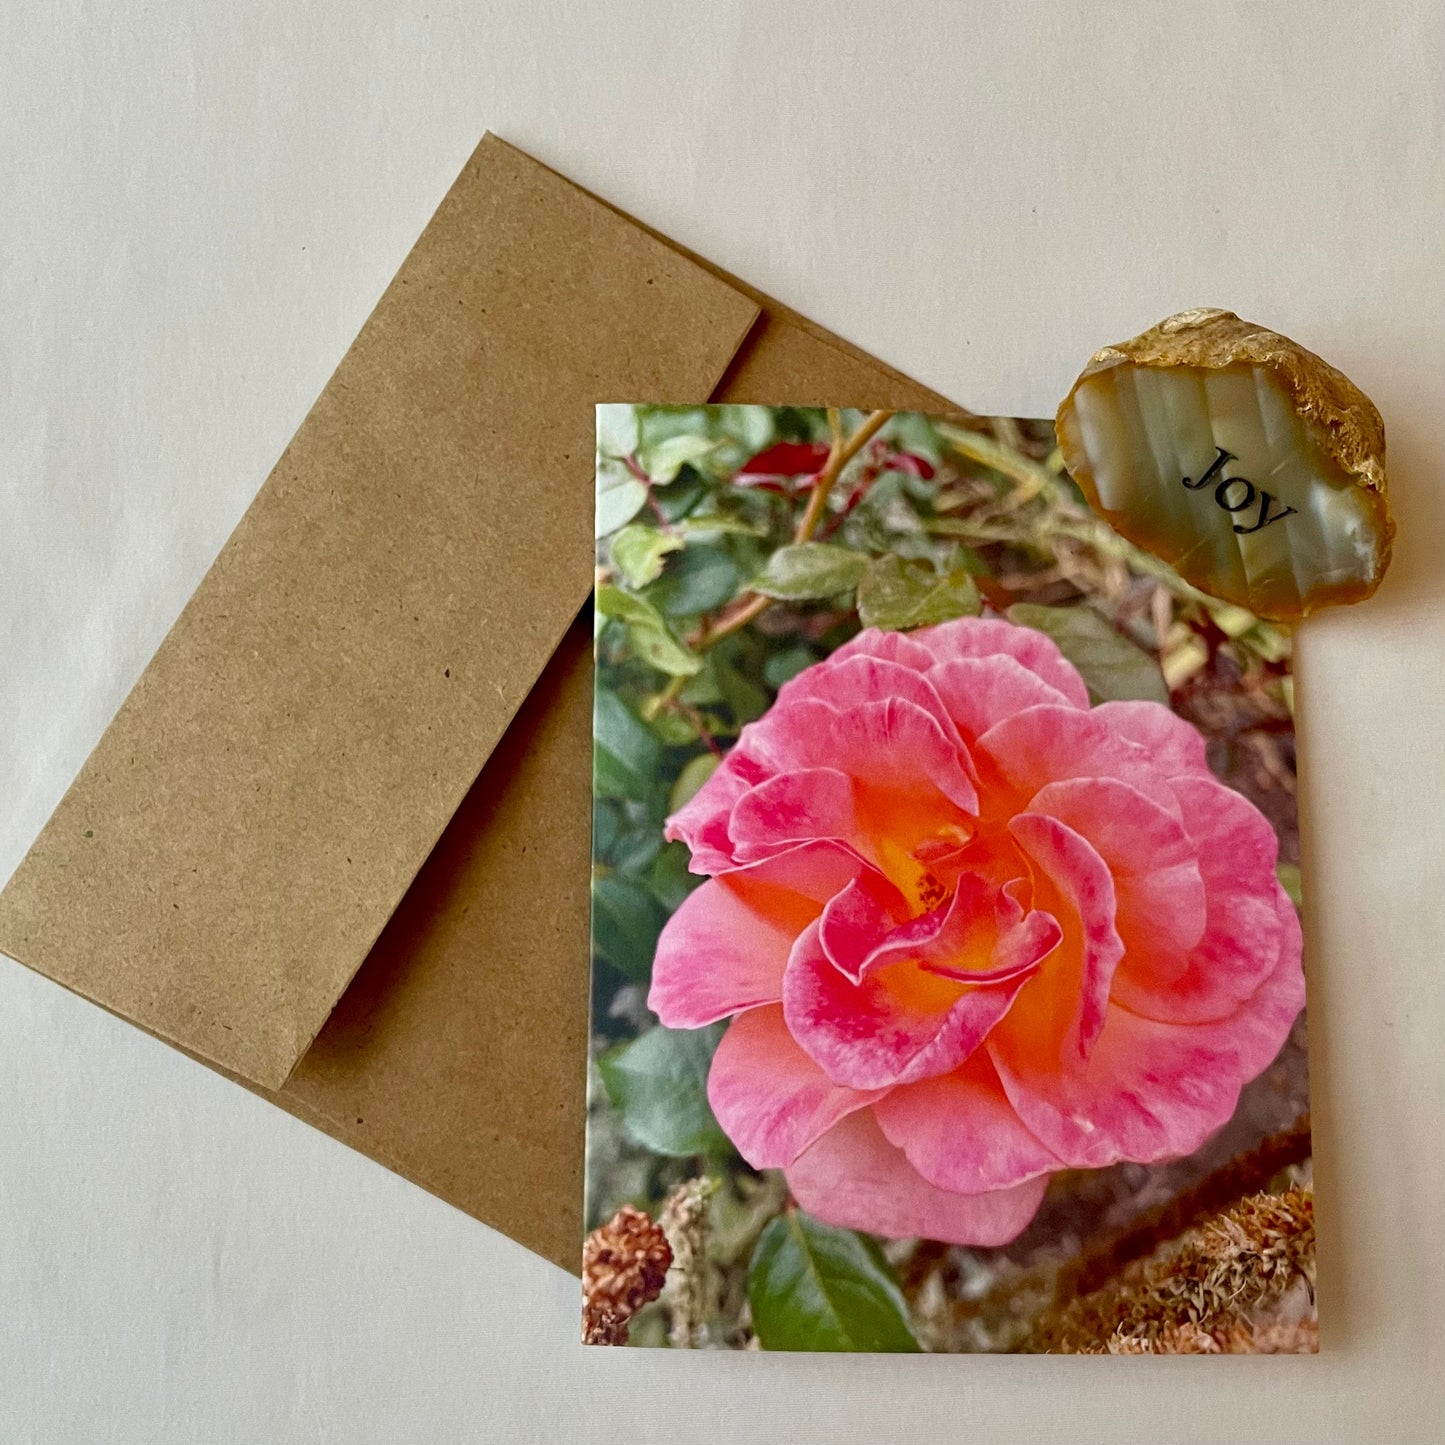 Brilliant Pink and Yellow Rose of Light Original Photography Greeting Card with Kraft